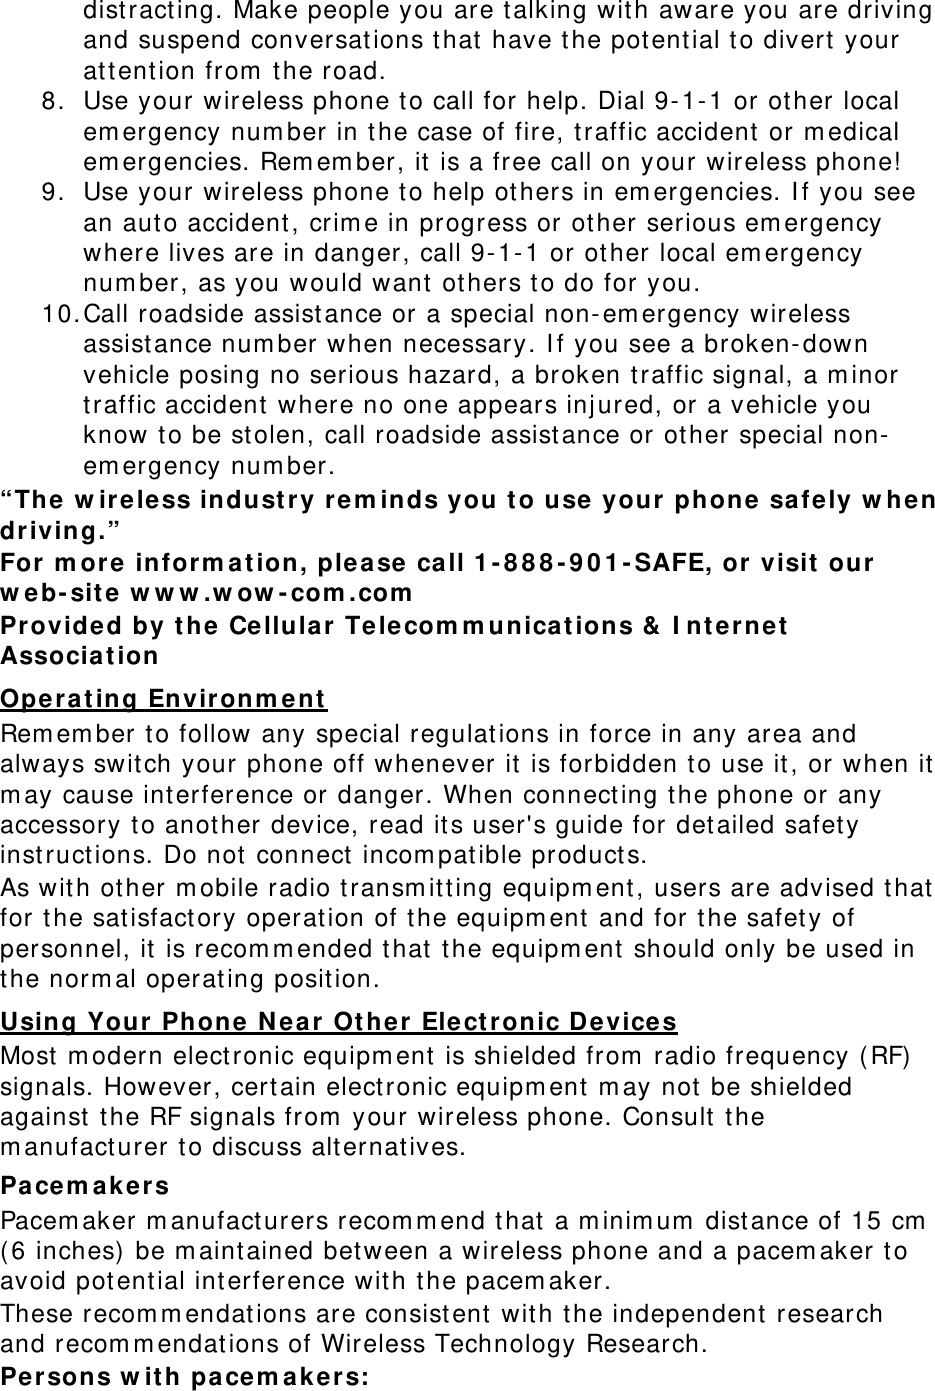 dist ract ing. Make people you are talking with aware you are driving and suspend conversat ions t hat have t he potent ial t o divert  your at tent ion from  the road. 8. Use your wireless phone to call for help. Dial 9- 1- 1 or other local em ergency num ber in t he case of fire, t raffic accident or m edical em ergencies. Rem em ber, it is a free call on your wireless phone! 9. Use your wireless phone to help others in em ergencies. I f you see an aut o accident, crim e in progress or other serious em ergency where lives are in danger, call 9-1- 1 or other local em ergency num ber, as you would want ot hers t o do for you. 10. Call roadside assistance or a special non- em ergency wireless assist ance num ber when necessary. I f you see a broken- down vehicle posing no serious hazard, a broken t raffic signal, a m inor traffic accident where no one appears inj ured, or a vehicle you know t o be stolen, call roadside assist ance or other special non-em ergency num ber. “The w ir e le ss industry r e m inds you t o u se your phone safe ly w hen driving.” For m ore inform a t ion, plea se call 1 - 8 8 8 - 9 0 1 - SAFE, or  visit  our  w eb- site w w w .w ow - com .com  Provided by t he Ce llula r  Telecom m unicat ions &amp;  I nt ernet  Associa t ion  Opera t ing Envir onm e nt  Rem em ber to follow any special regulat ions in force in any area and always switch your phone off whenever it is forbidden t o use it, or when it  m ay cause interference or danger. When connect ing t he phone or any accessory t o another device, read its user&apos;s guide for det ailed safet y instructions. Do not connect  incom pat ible products. As with other m obile radio transm itt ing equipm ent , users are advised that  for t he sat isfact ory operation of t he equipm ent  and for t he safet y of personnel, it is recom m ended that  t he equipm ent should only be used in the norm al operat ing position. Using Your Phone  N ear Ot he r  Elect ronic Devices Most  m odern elect ronic equipm ent is shielded from  radio frequency ( RF)  signals. However, cert ain elect ronic equipm ent  m ay not be shielded against  t he RF signals from  your wireless phone. Consult t he m anufact urer t o discuss alt ernat ives. Pacem akers Pacem aker m anufacturers recom m end that  a m inim um  dist ance of 15 cm  ( 6 inches)  be m aintained between a wireless phone and a pacem aker t o avoid potent ial int erference with t he pacem aker. These recom m endat ions are consist ent  with t he independent research and recom m endations of Wireless Technology Research. Persons w it h pacem ak e r s: 